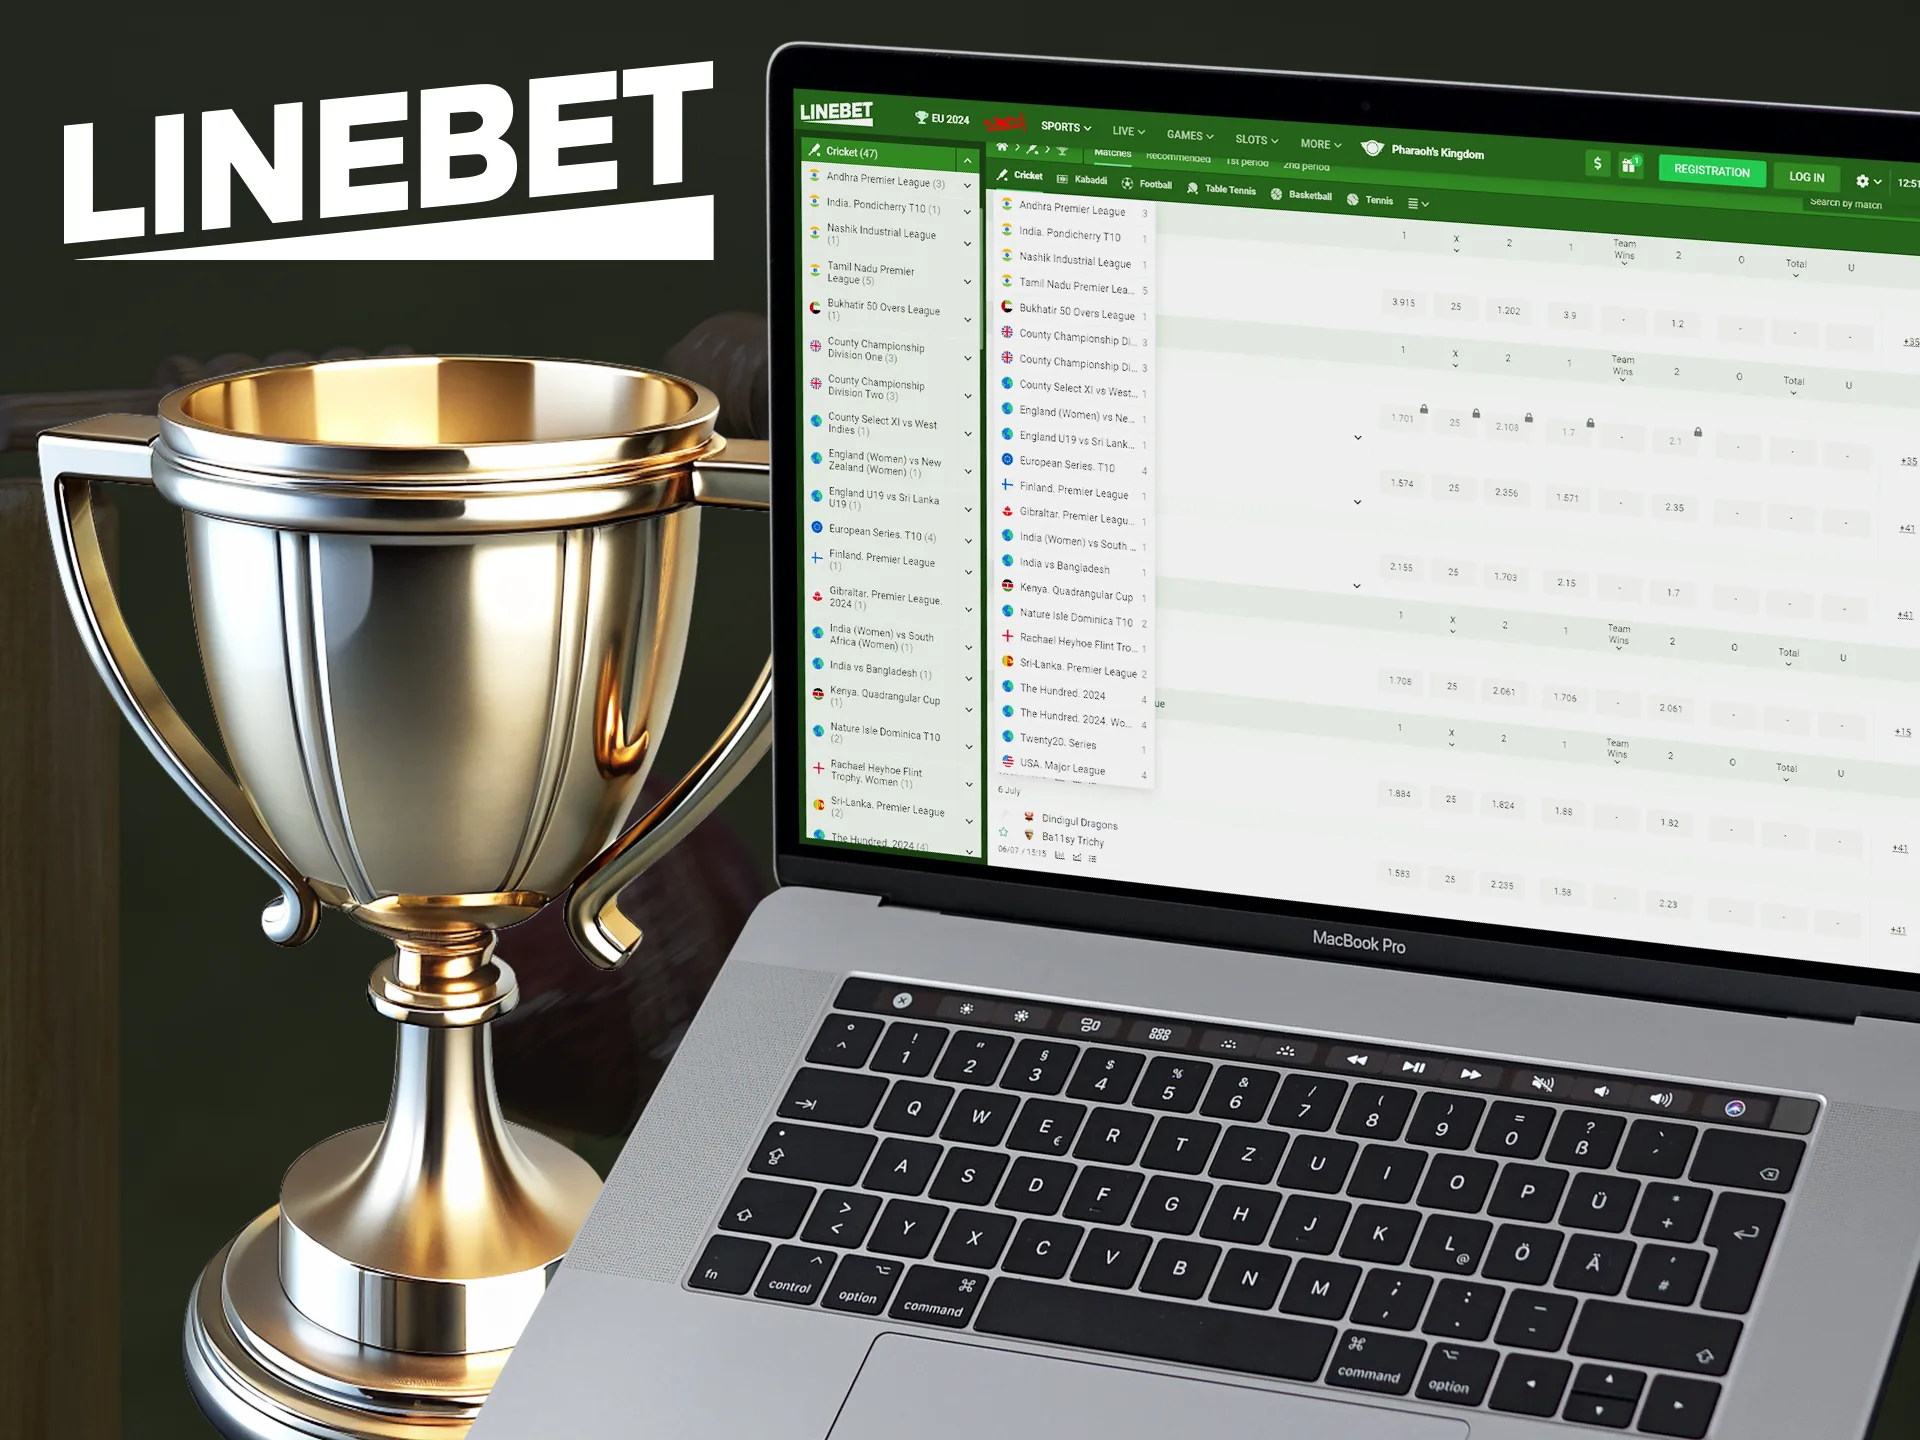 You can bet on all official cricket tournaments at Linebet.